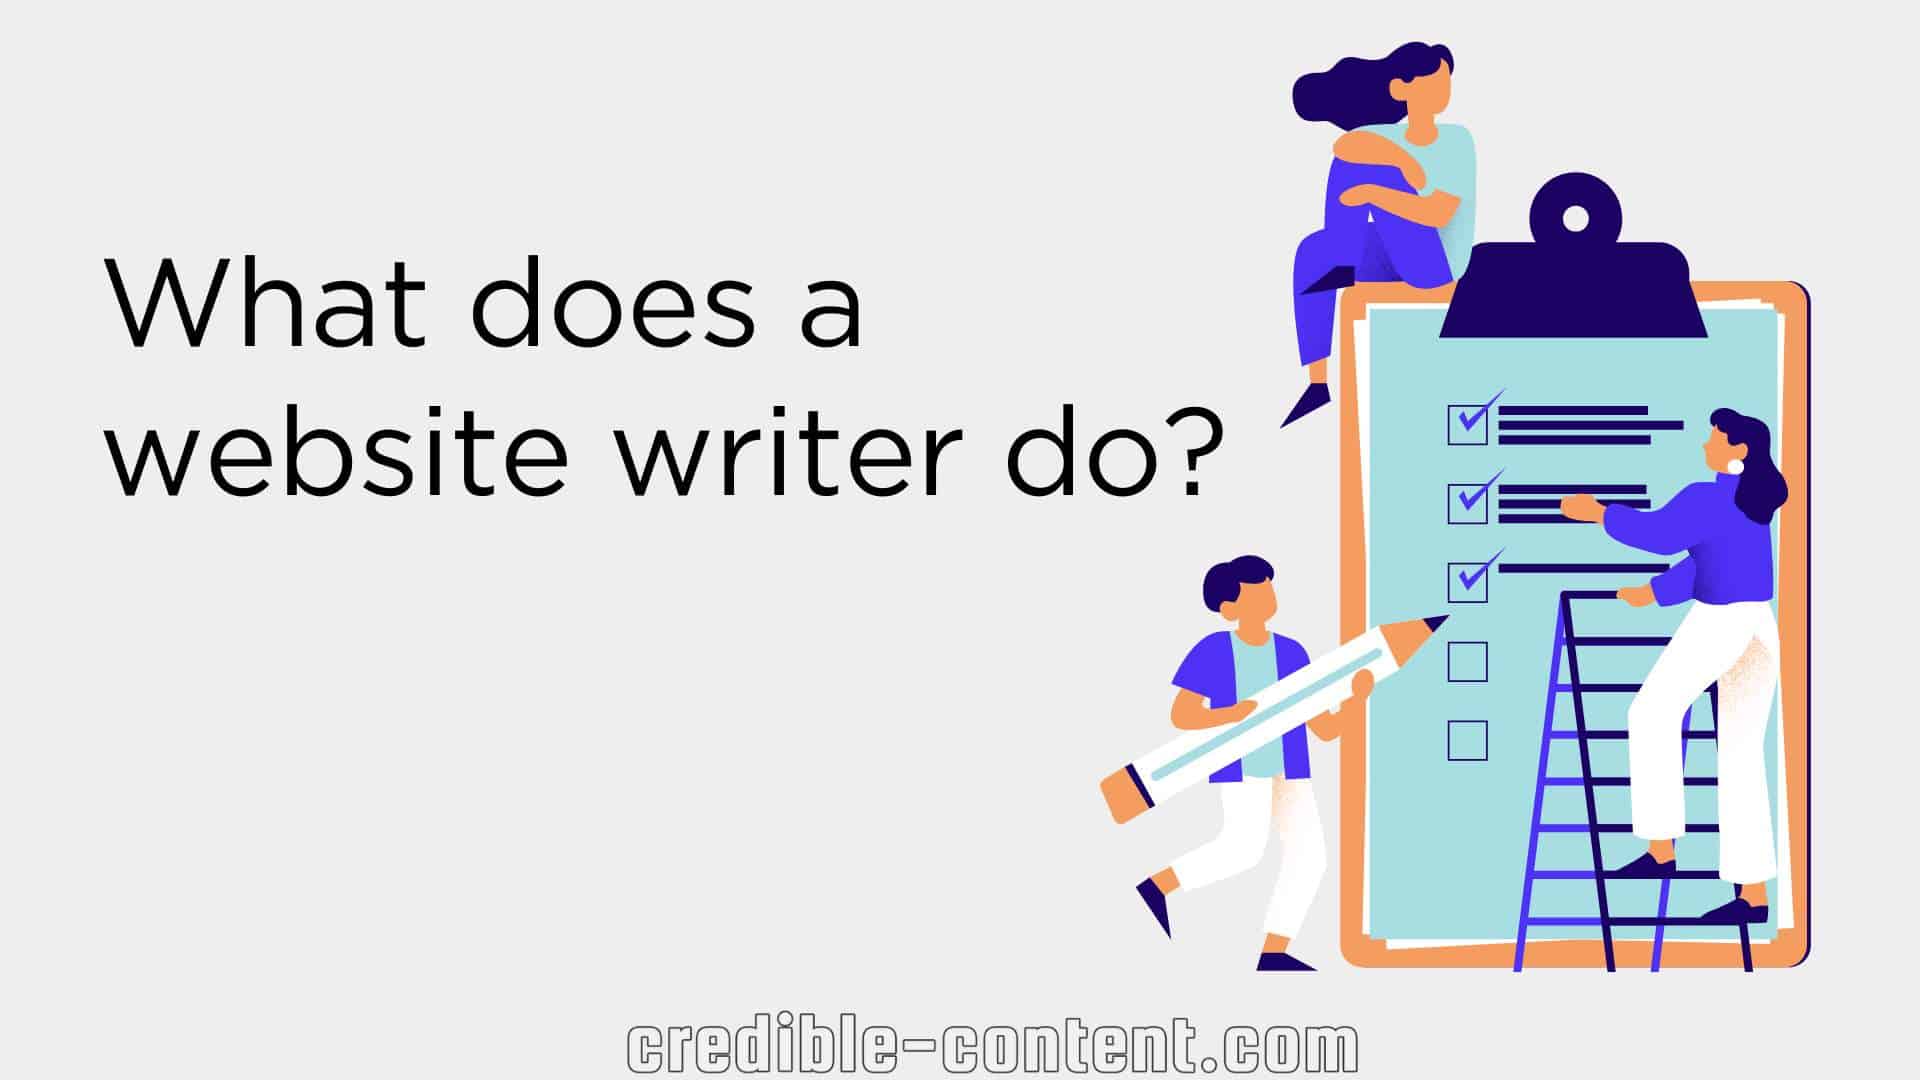 What does a website writer do